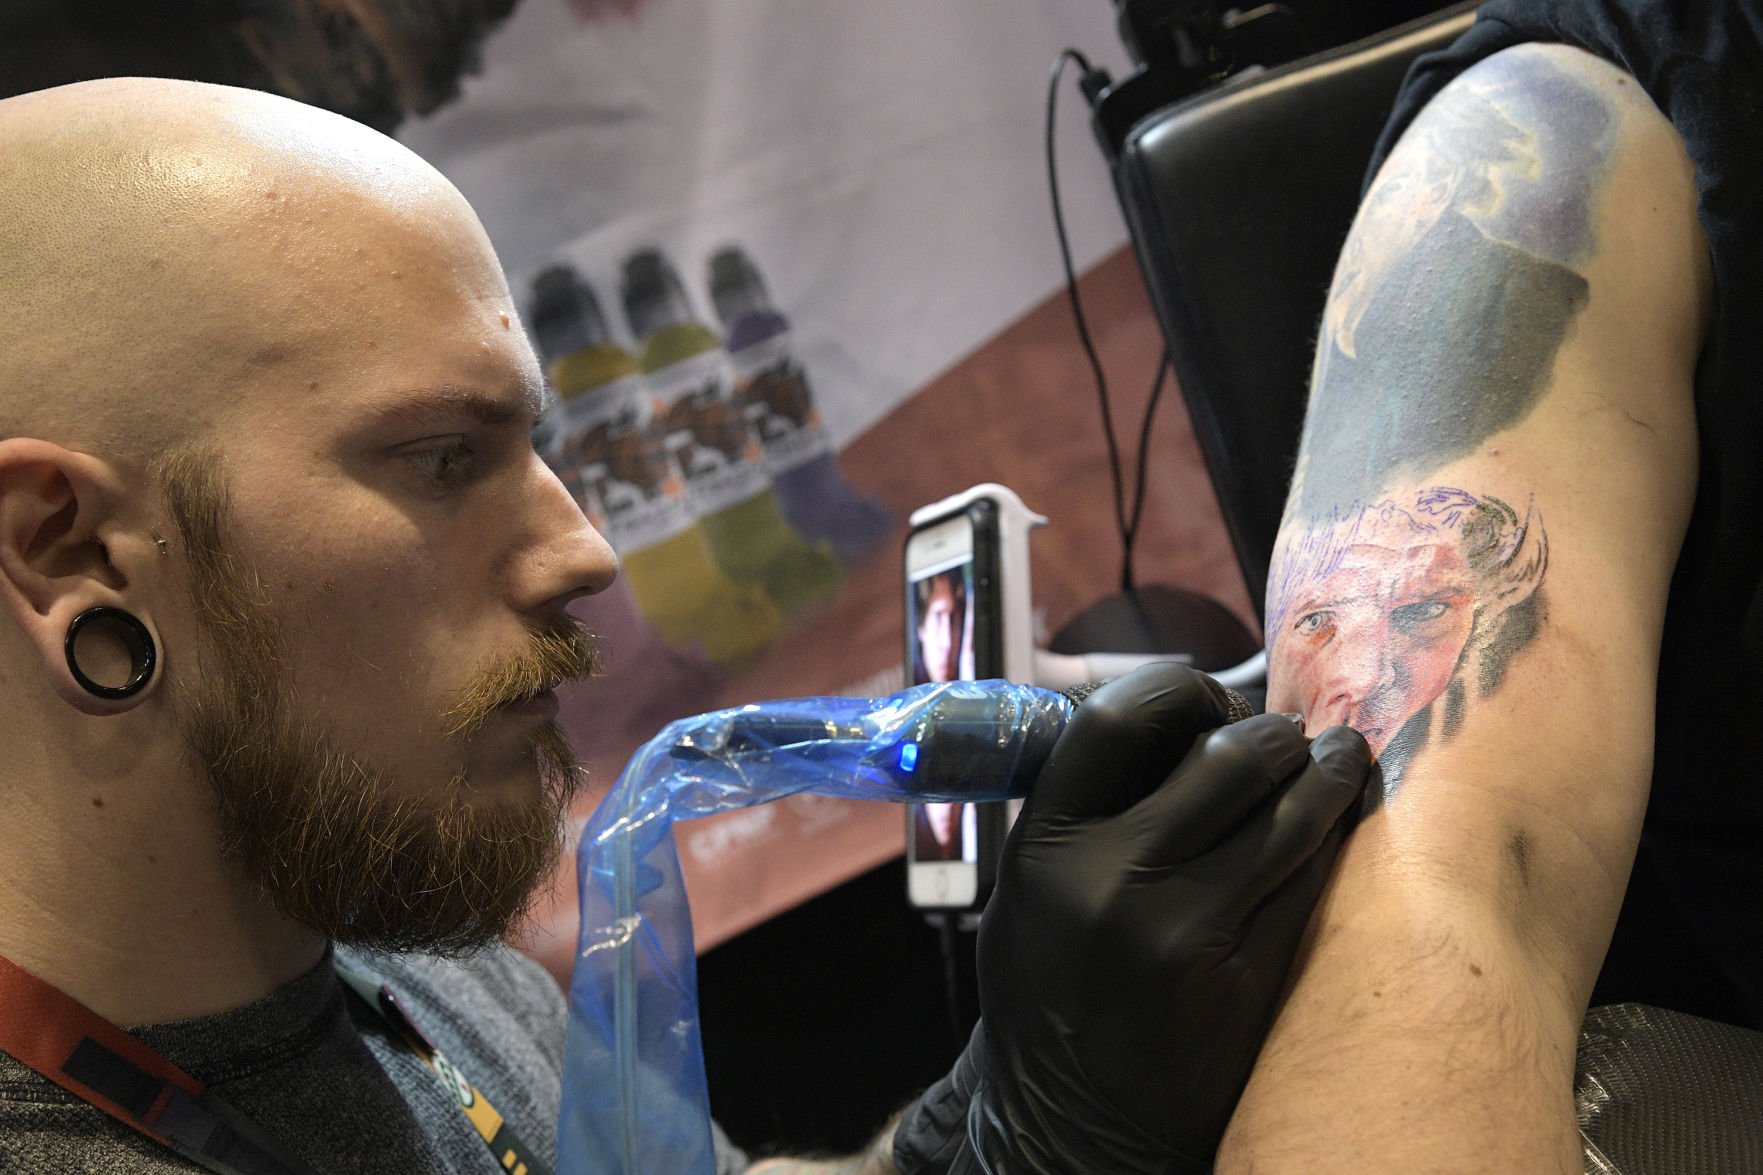 Are Hand Tattoos No Longer Taboo? Depends On Your Job - WSJ